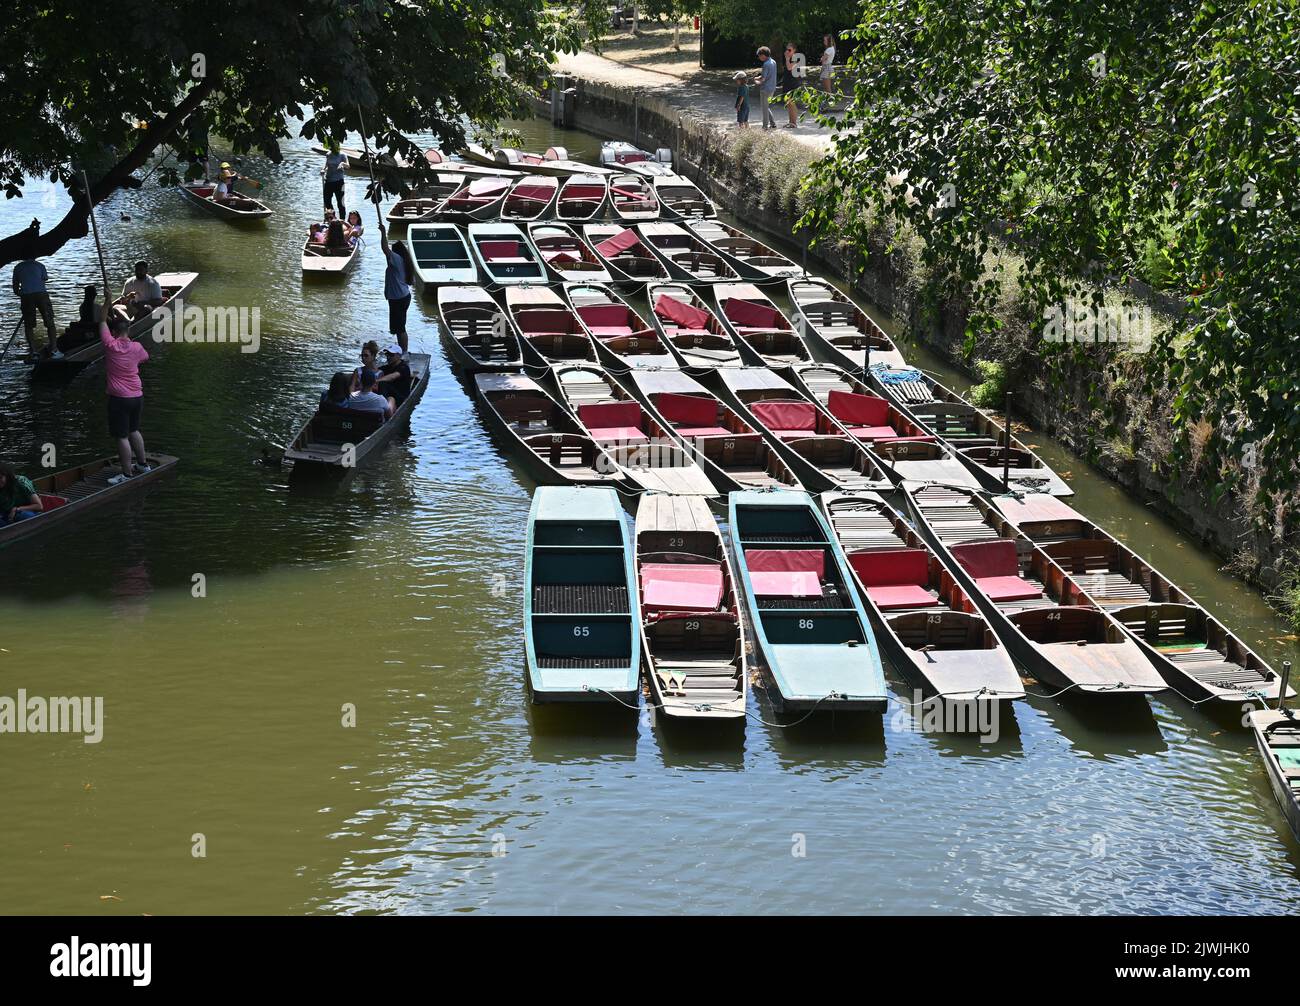 Punting is an activity that can be found on the River Cherwell by Magdalen Bridge in the city of Oxford Stock Photo